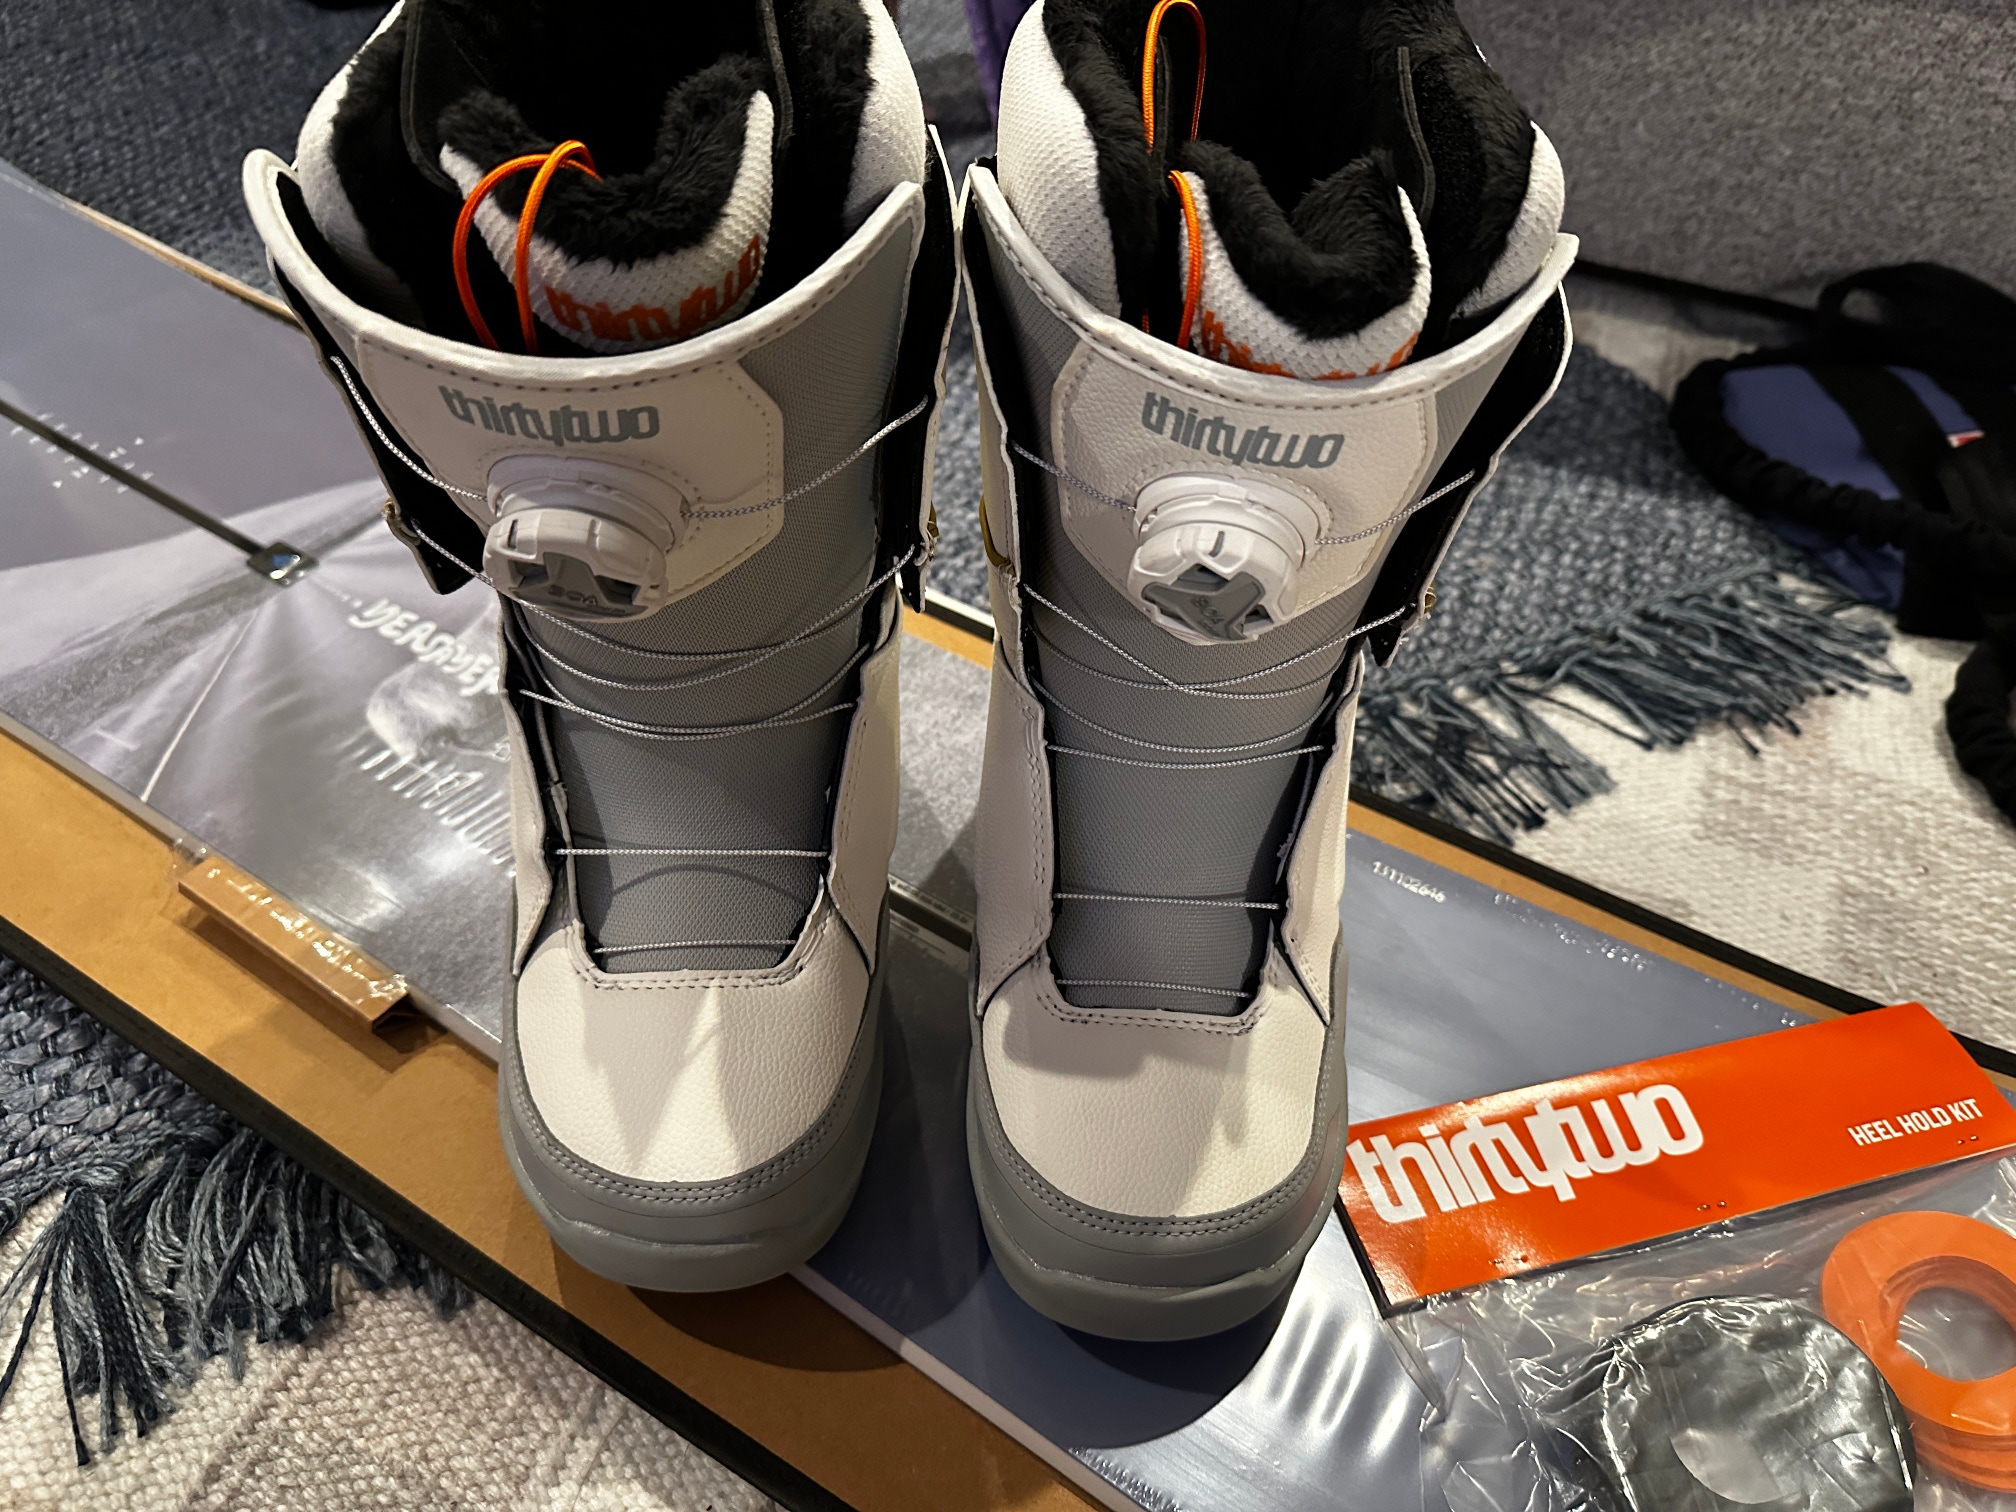 New 2024 Women's 7.0 Thirty Two Lashed Double Boa Snowboard gray creme Boots Medium Flex